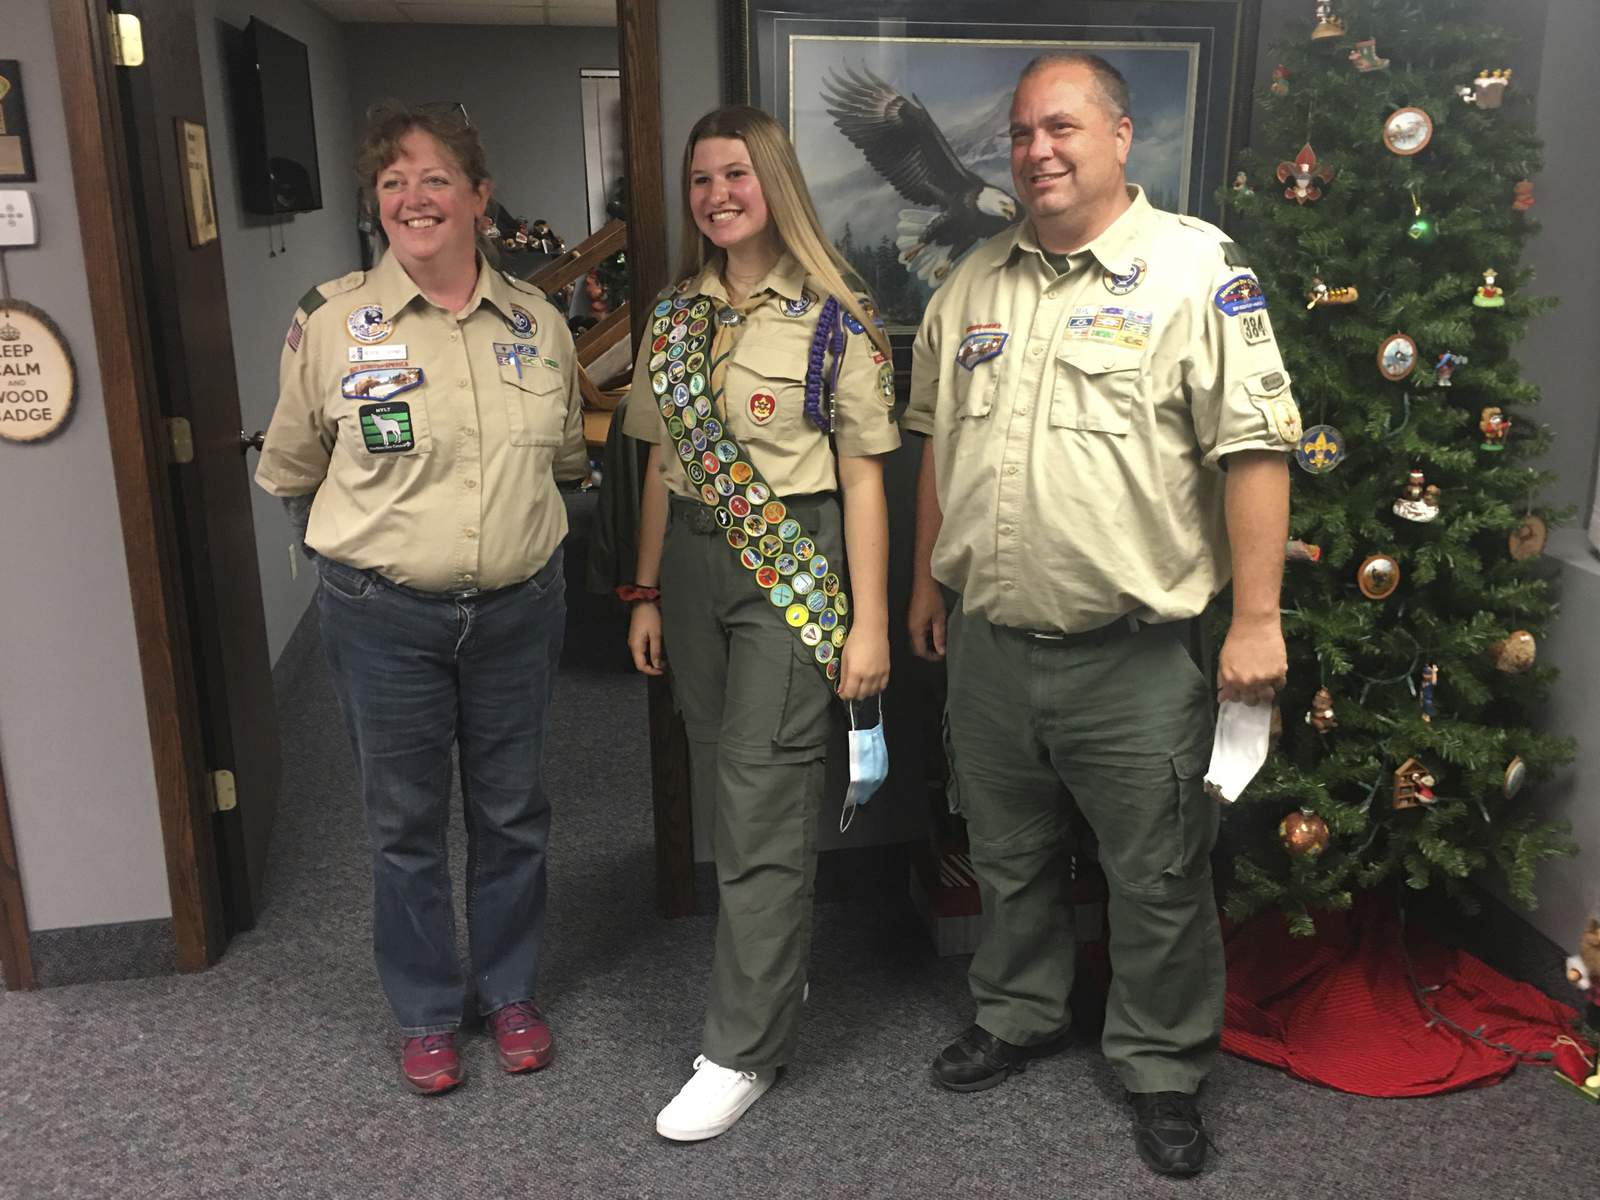 Boy Scouts celebrate the first group of female Eagle Scouts